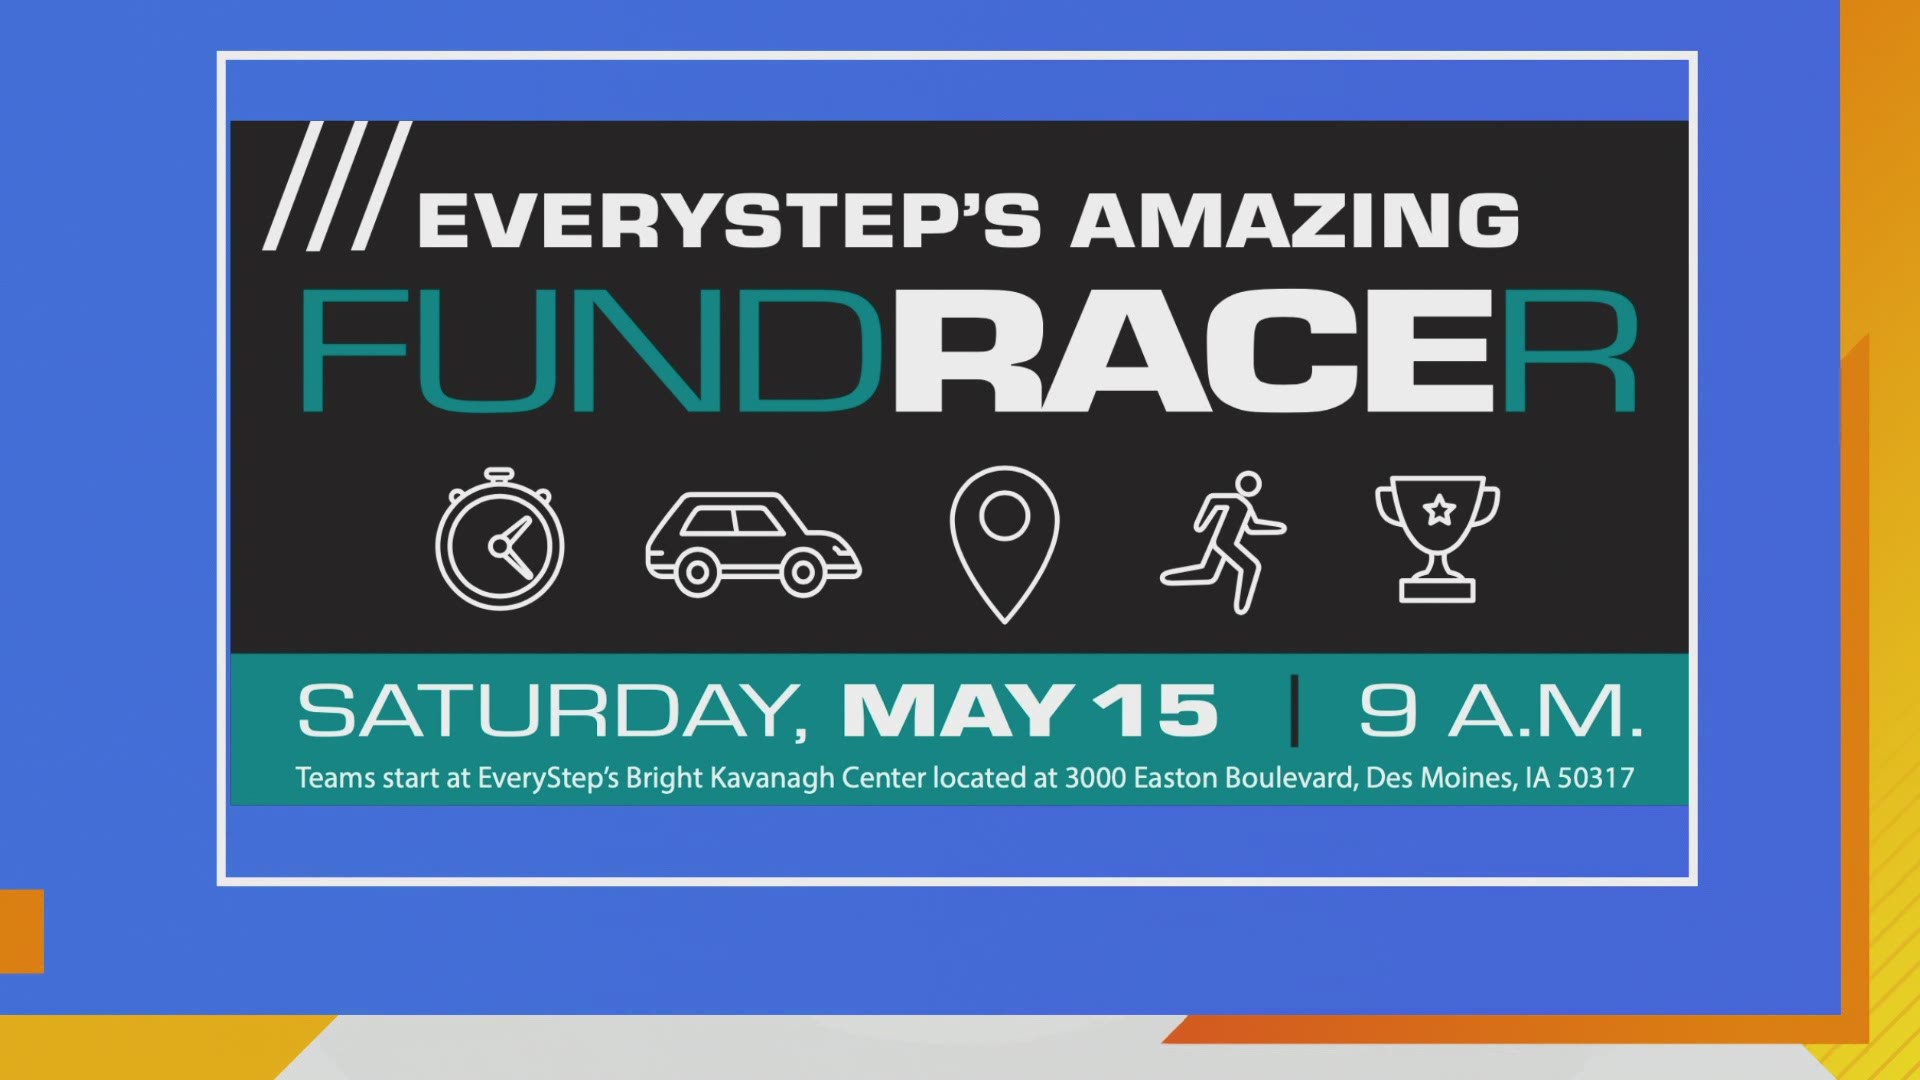 Maggie Mathiasen has details on Everystep's Amazing FundRacer event happening May 15th in Des Moines. Prizes will be awarded to the top three teams!